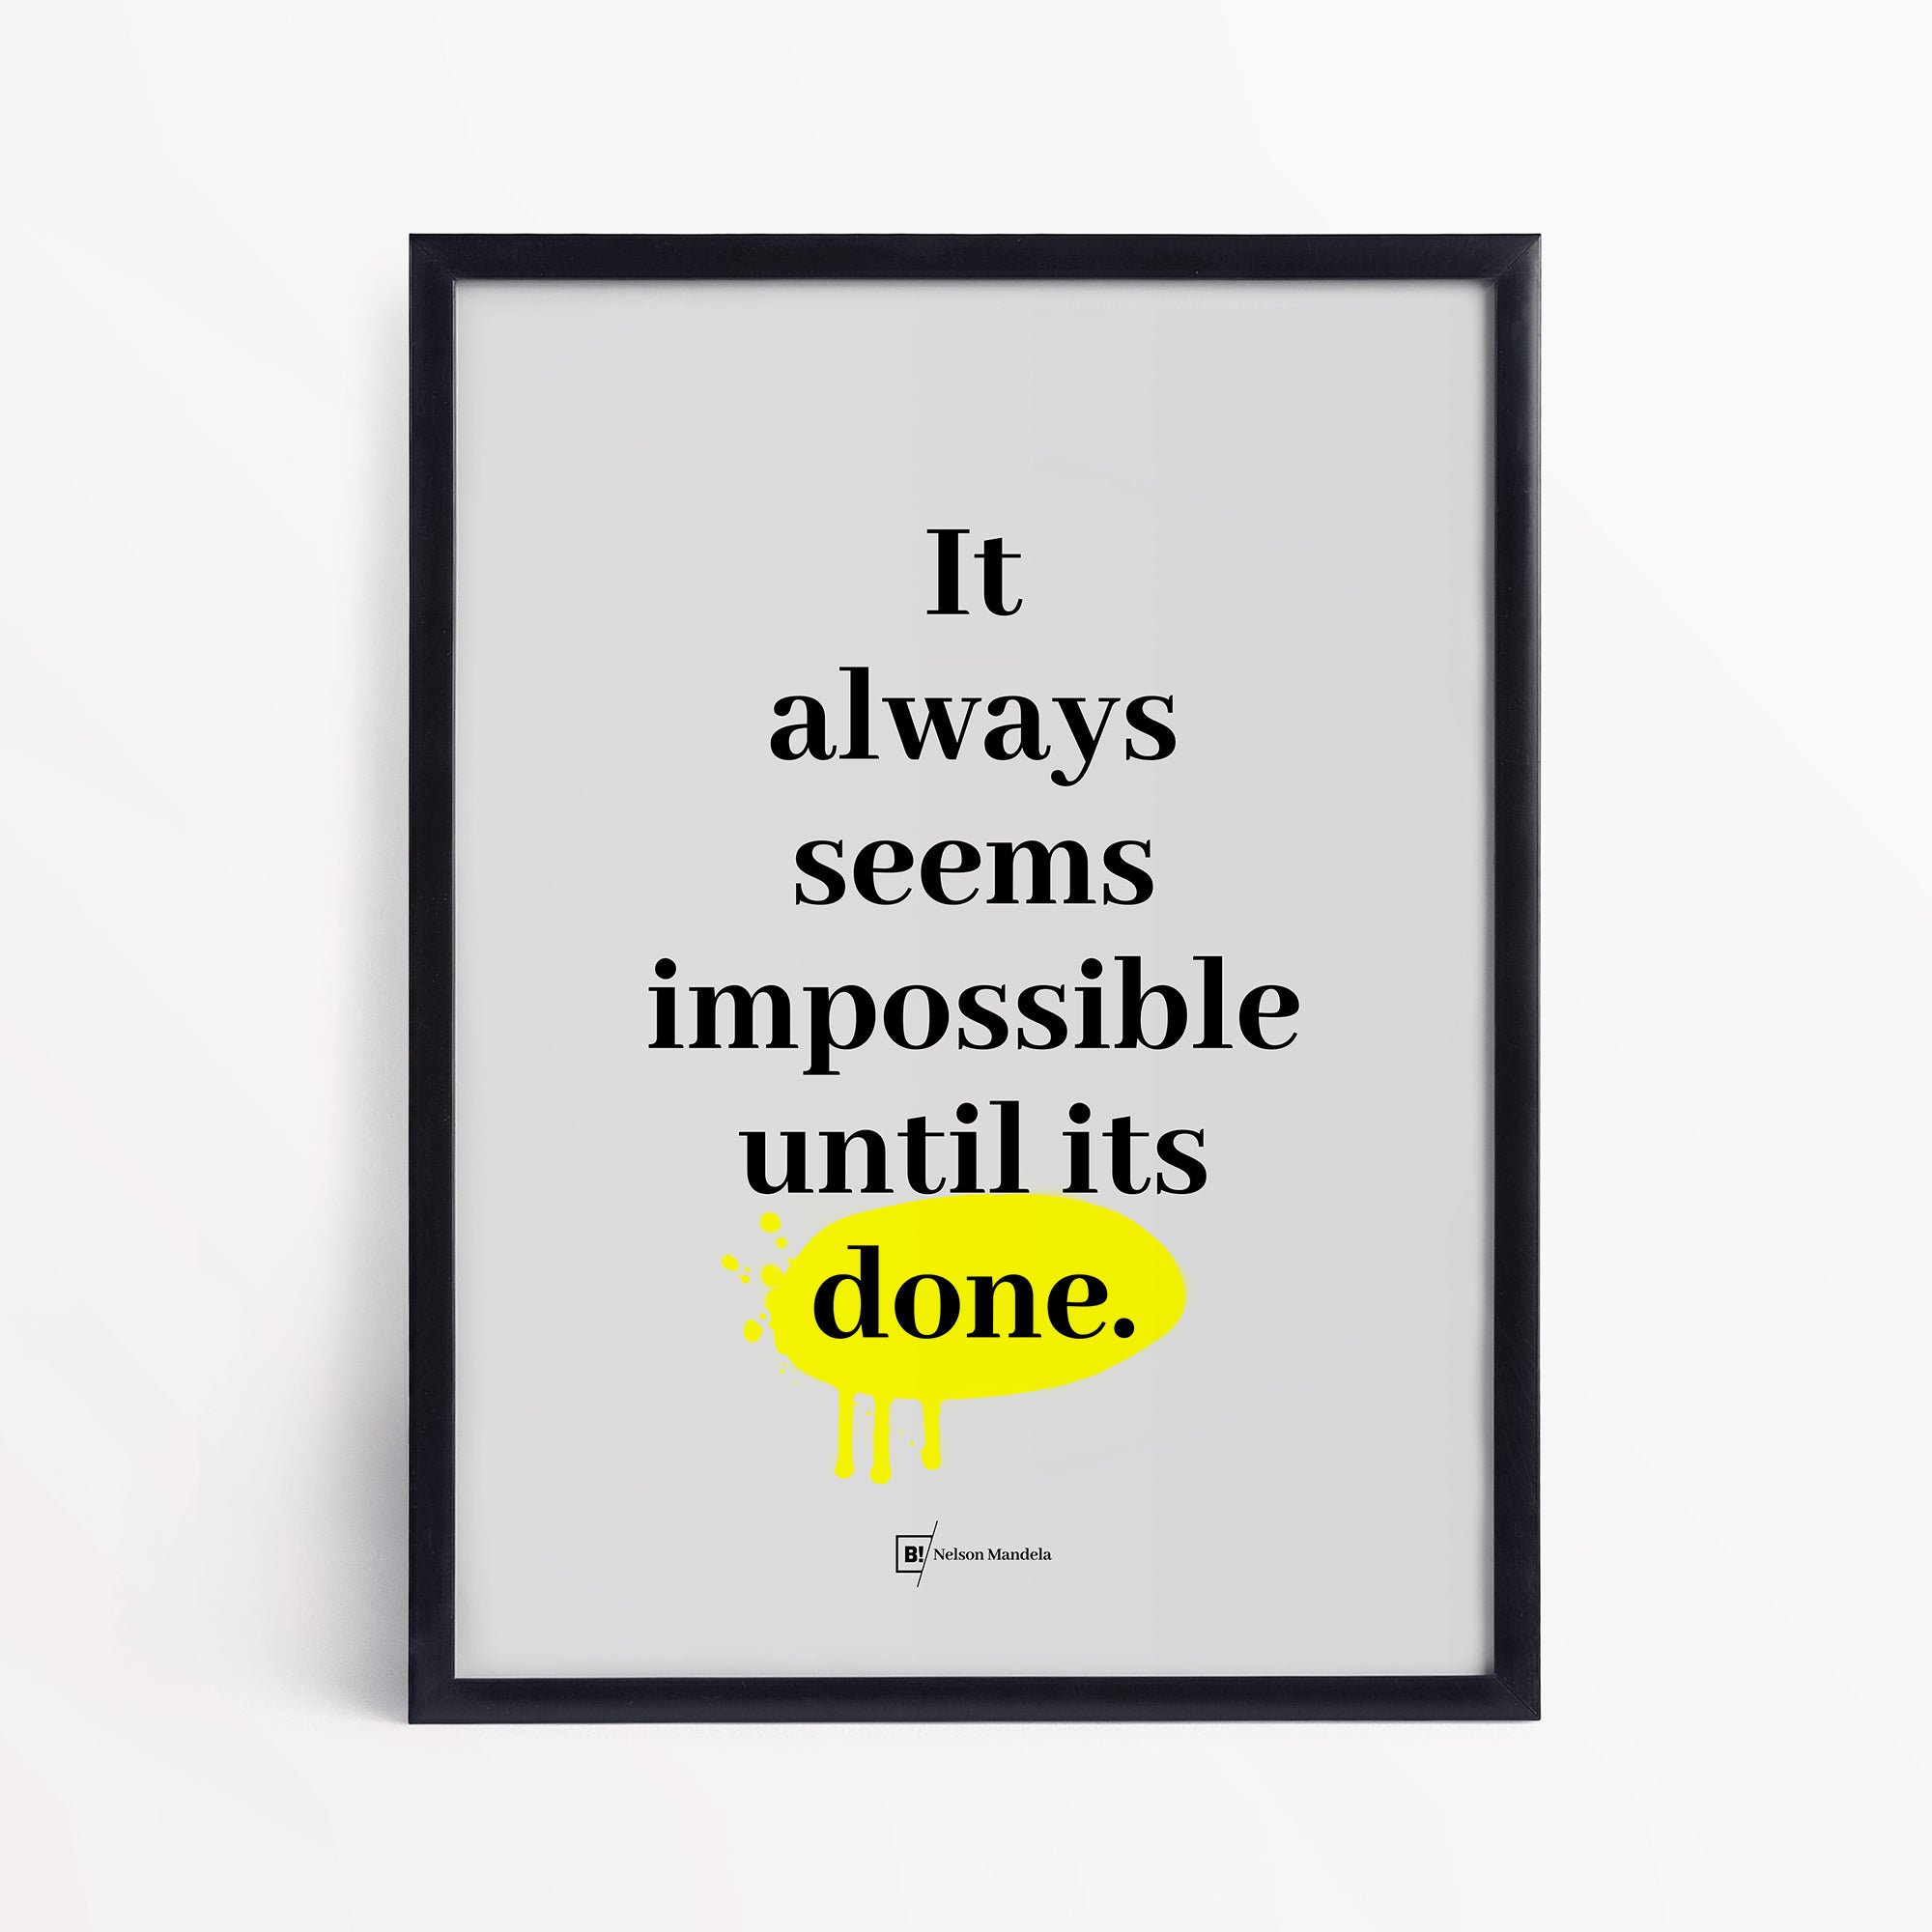 Be inspired by Nelson Mandela's famous "It always seems impossible until its done" quote art print. This artwork was printed using the giclée process on archival acid-free paper and is presented in a simple black frame that captures its timeless beauty in every detail.